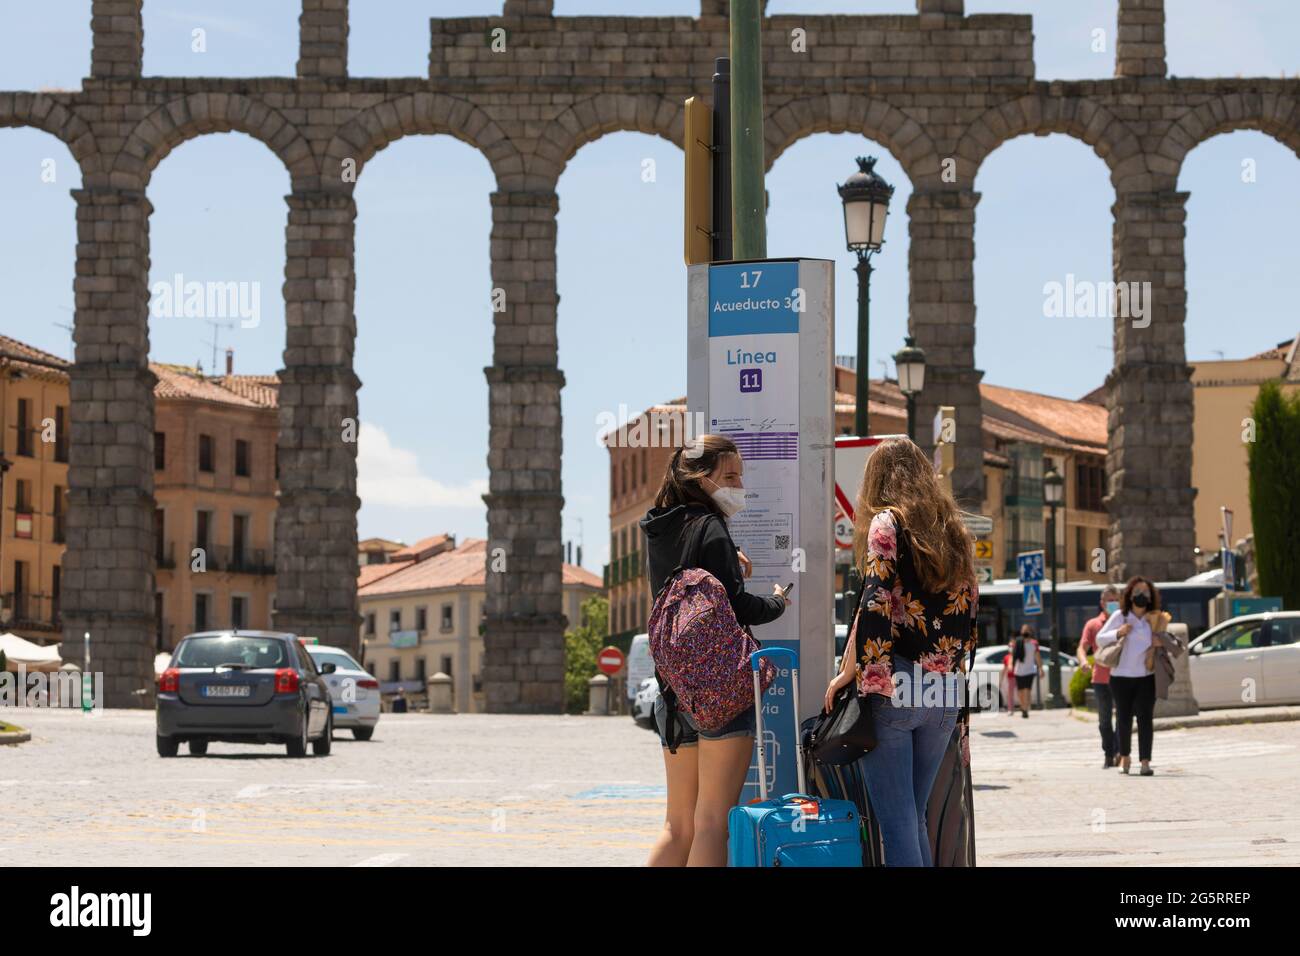 Segovia, Spain - June 2, 2021: Two young girls wait at a bus stop with their suitcases, near the Aqueduct of Segovia, to go to the train station Stock Photo